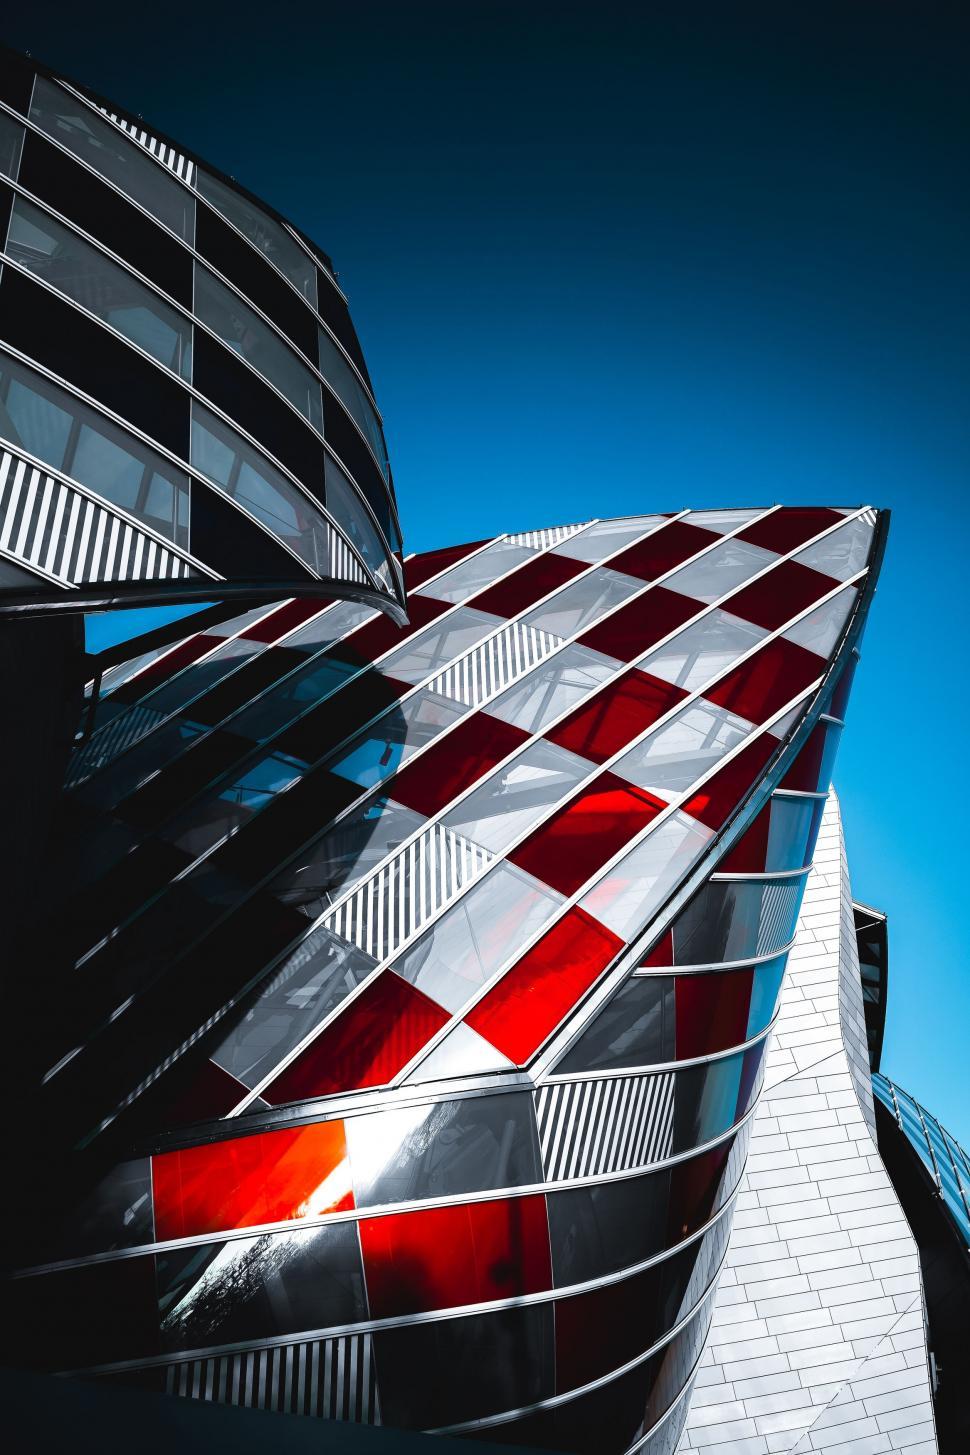 Free Image of Red and White Checkered Design on Side of Building 